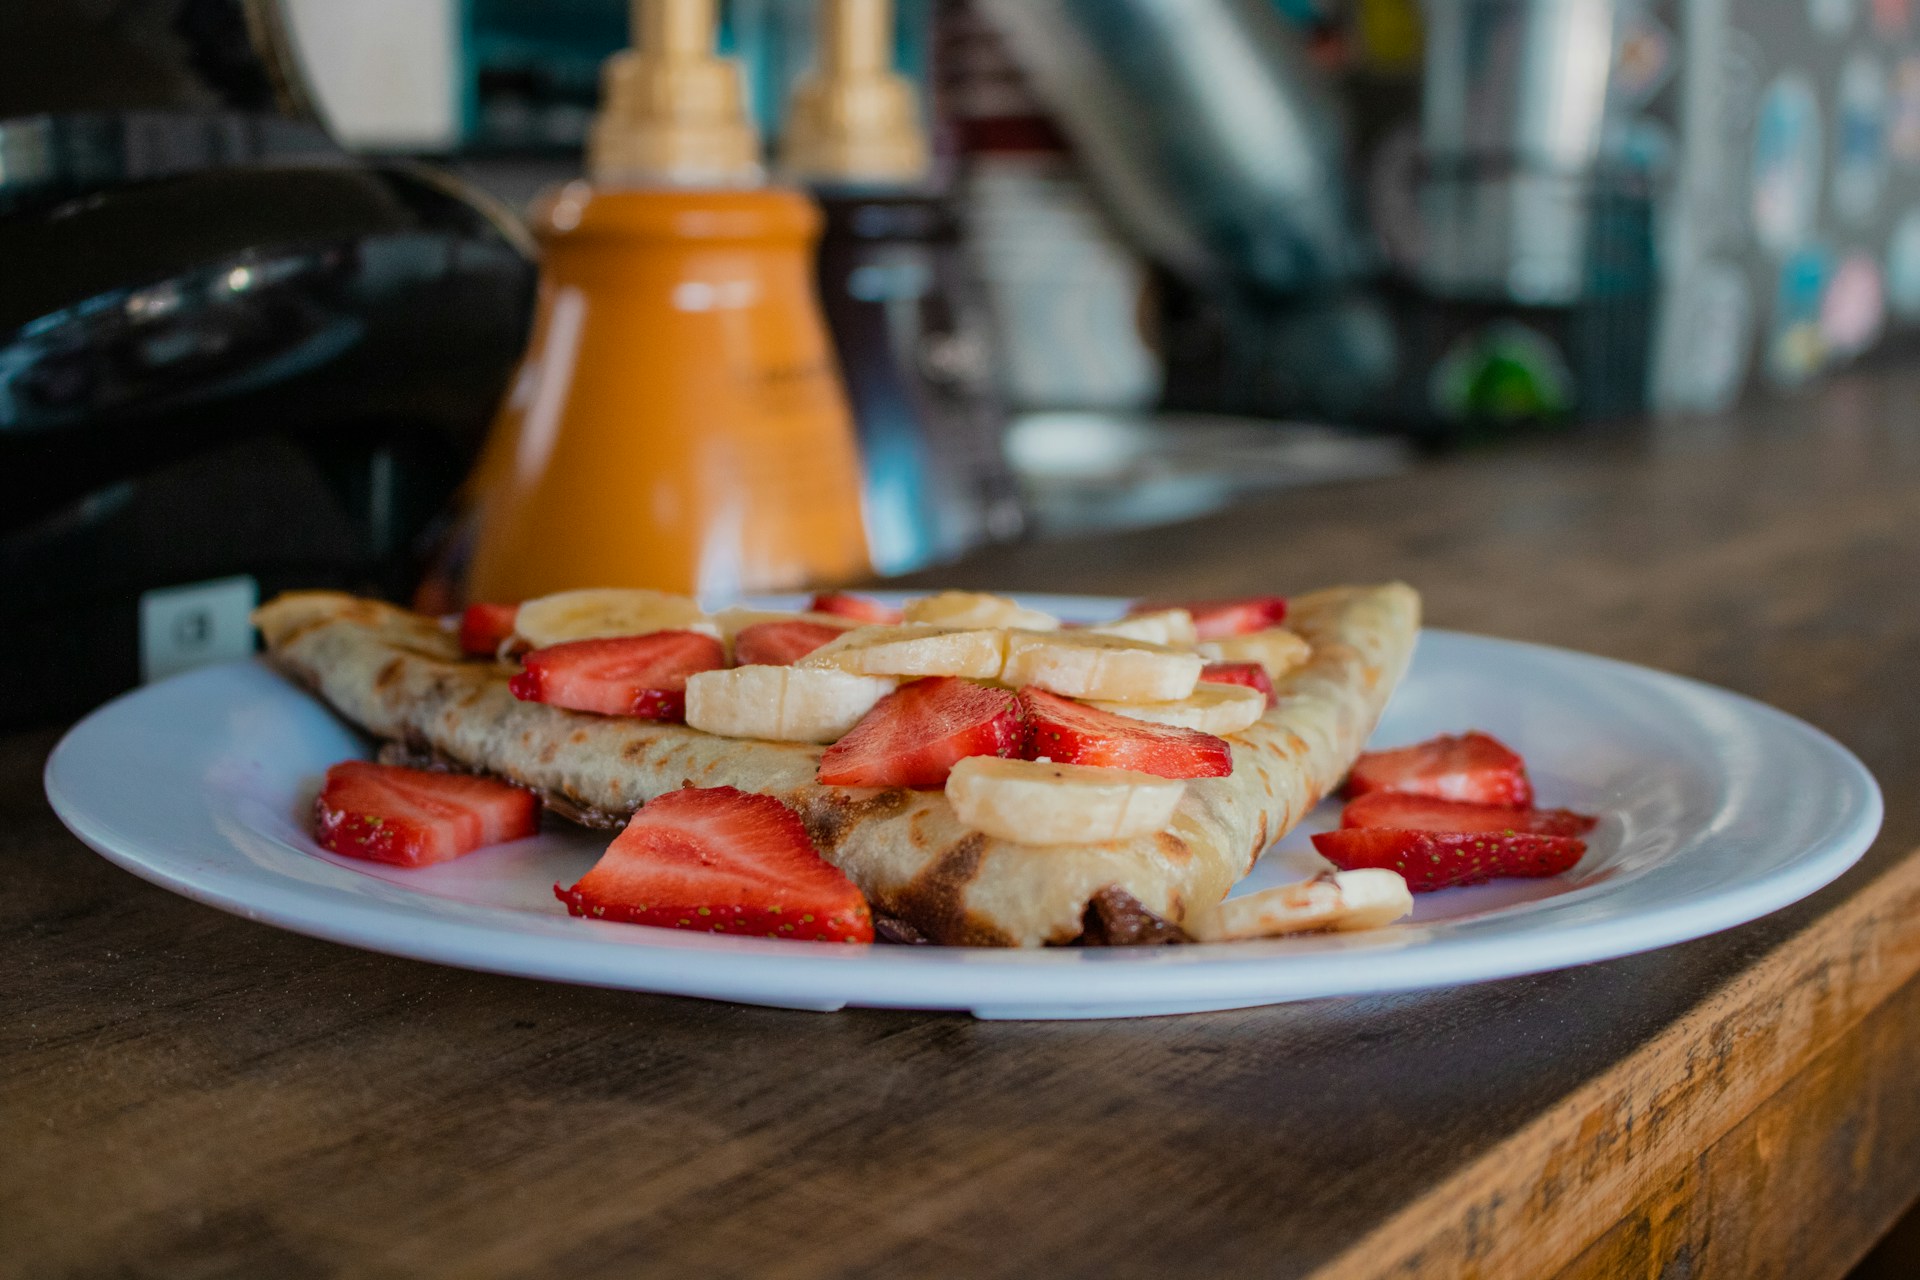 Crepe with bananas and strawberries